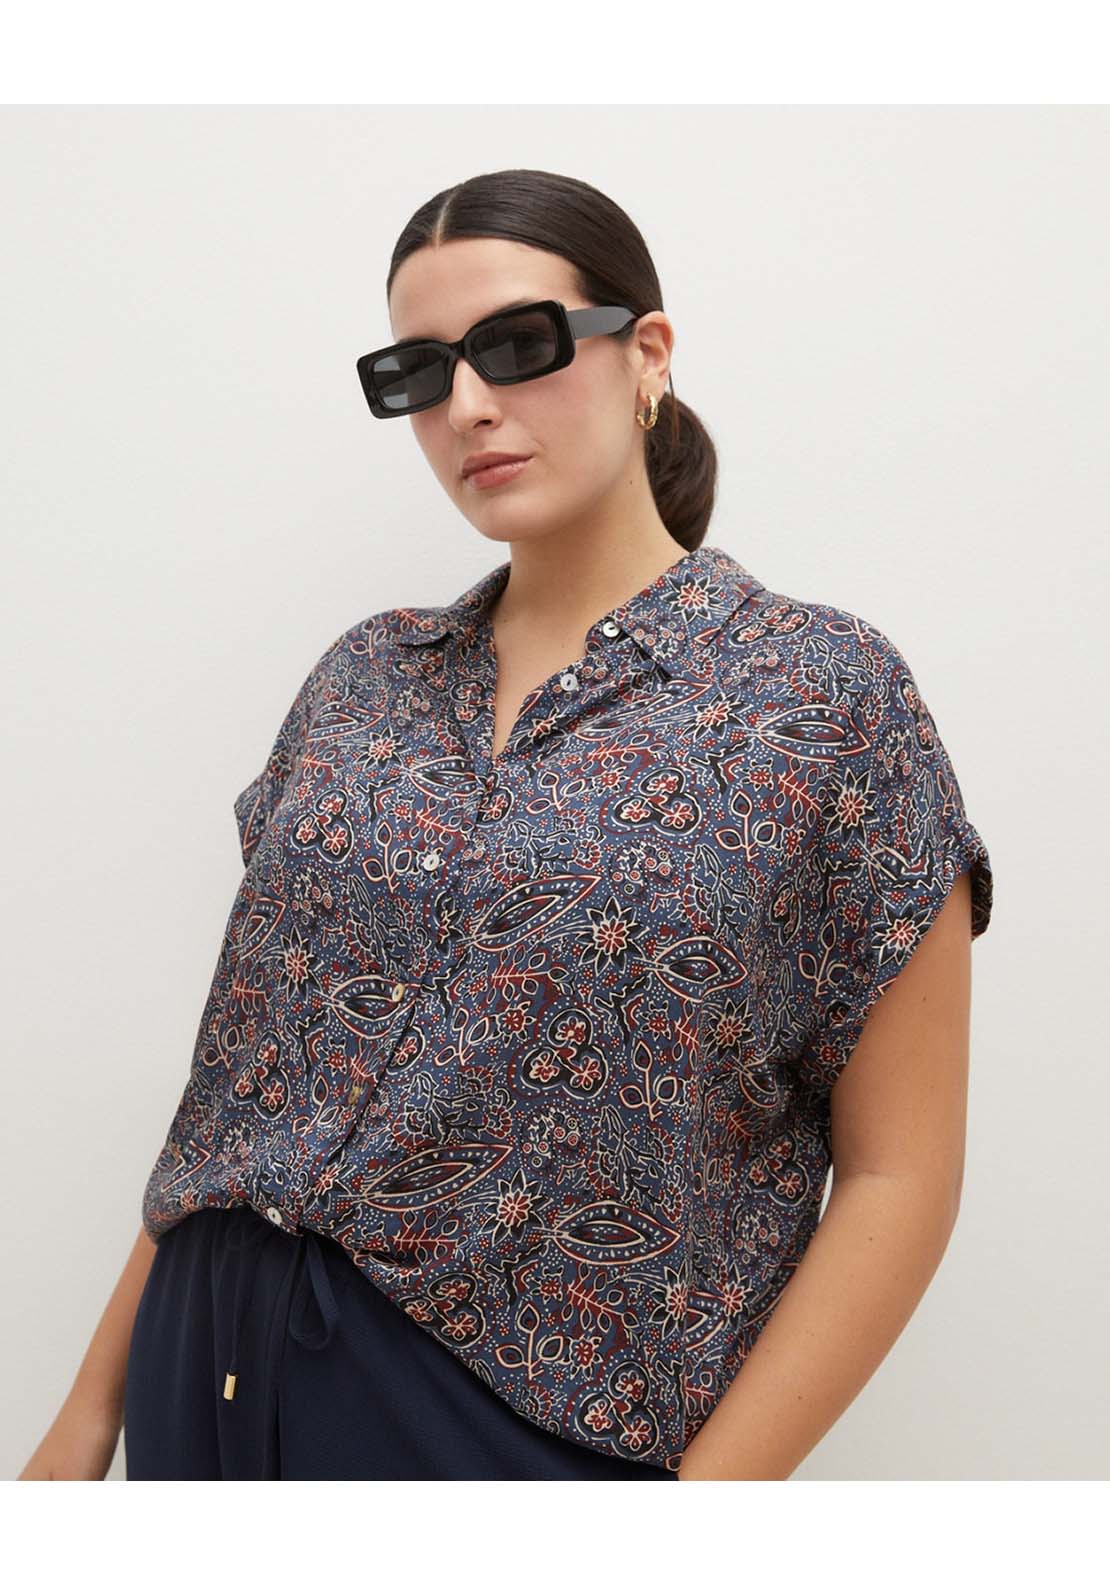 Couchel Short Sleeve Blouse 1 Shaws Department Stores